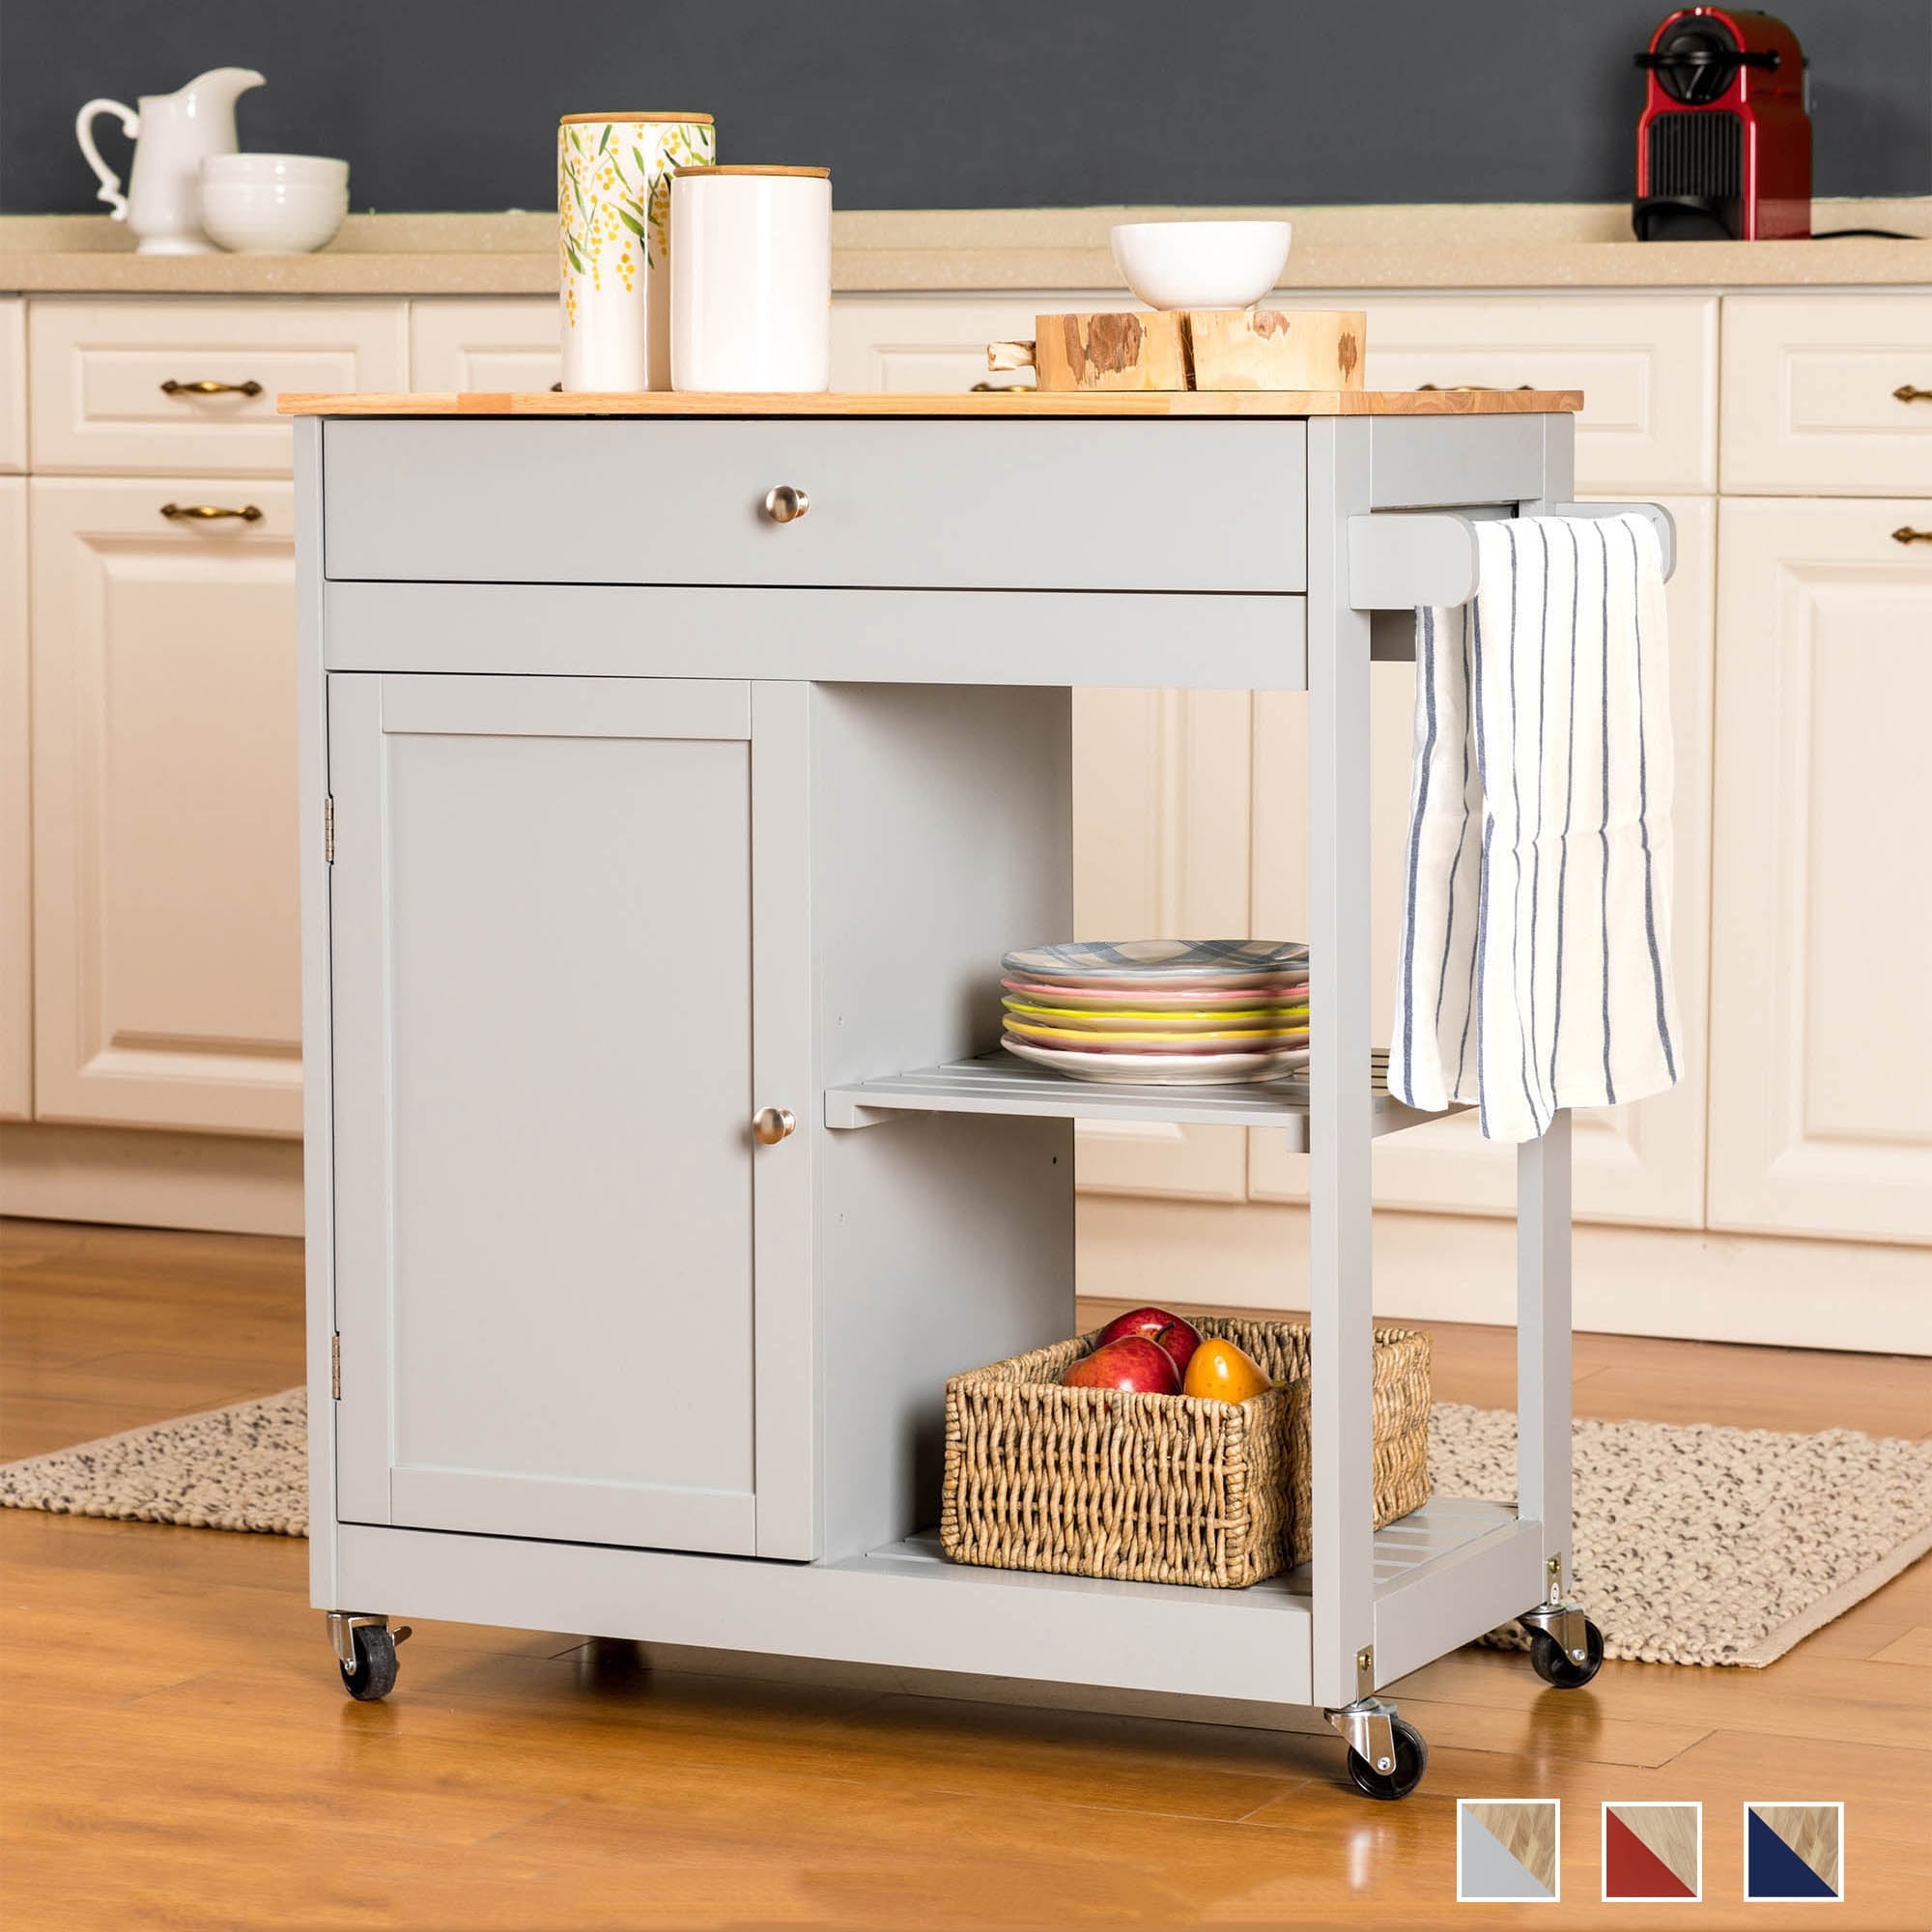 https://ak1.ostkcdn.com/images/products/is/images/direct/b2b3eab40274710ac8e5b86d68d73bea5ae2326d/Glitzhome-35%22H-Modern-Rolling-Trolley-Storage-Kitchen-Island-Cart-with-Wheels.jpg